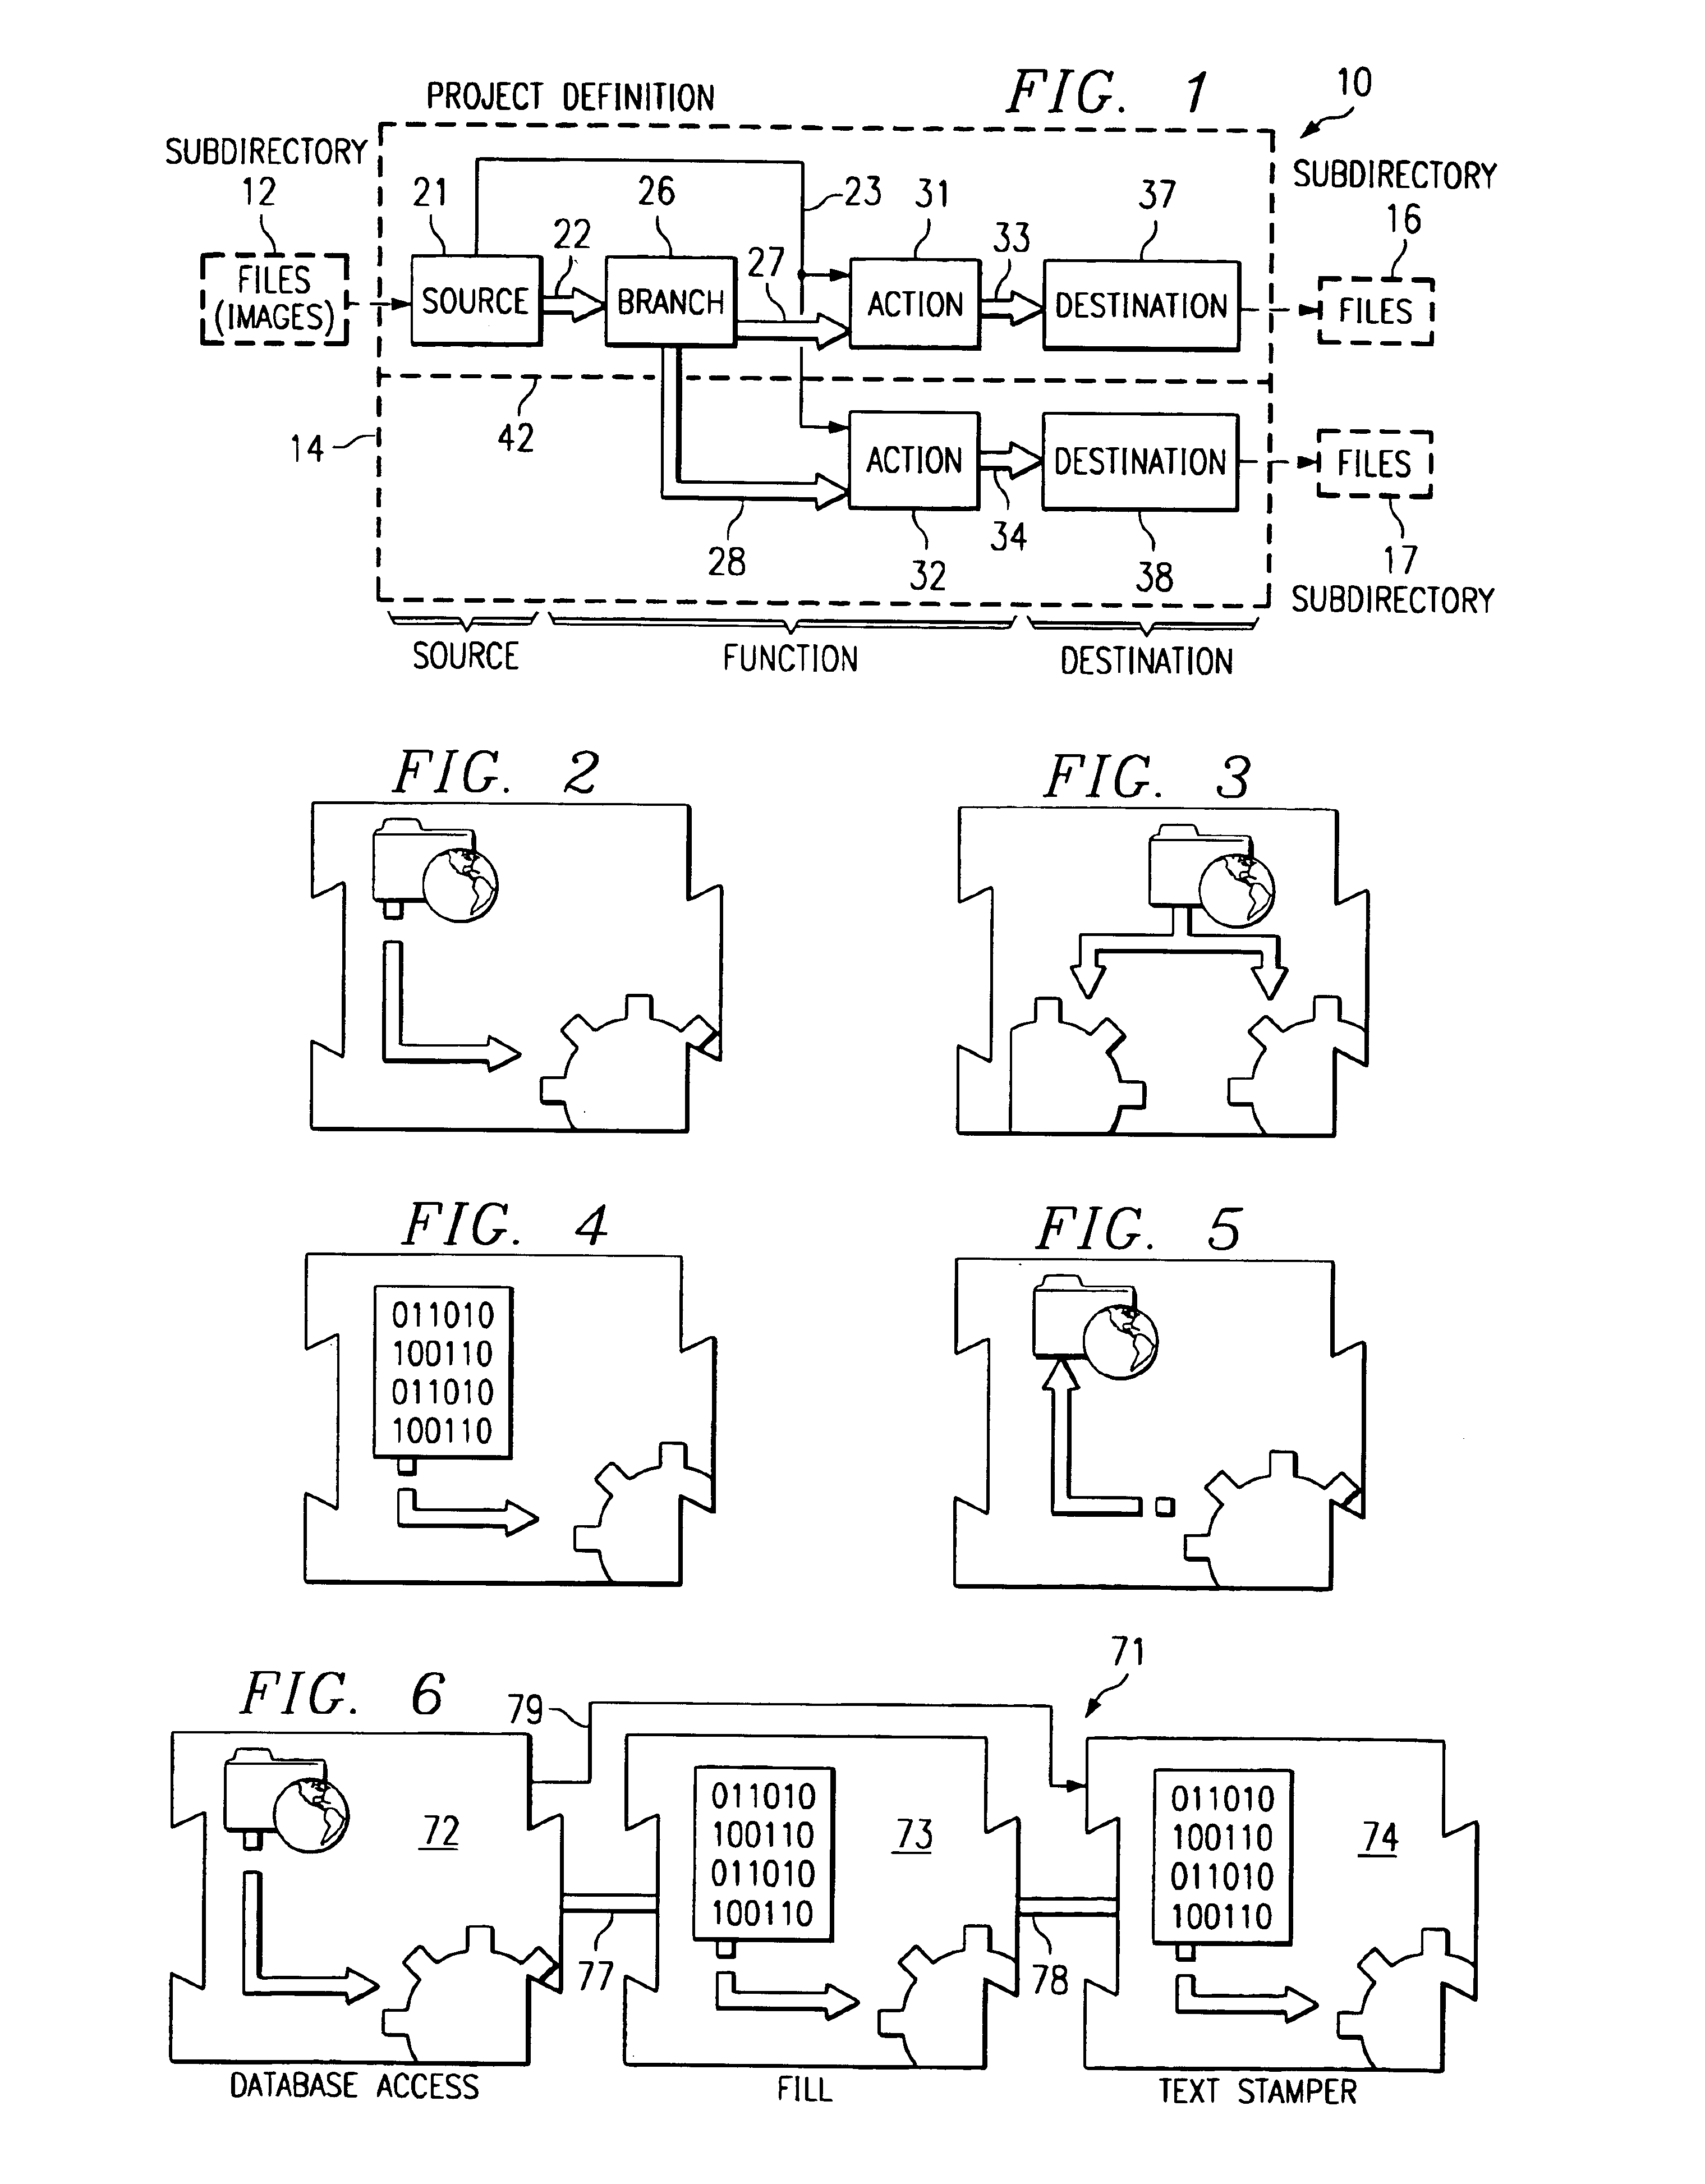 Method and apparatus for obtaining and storing data during automated data processing